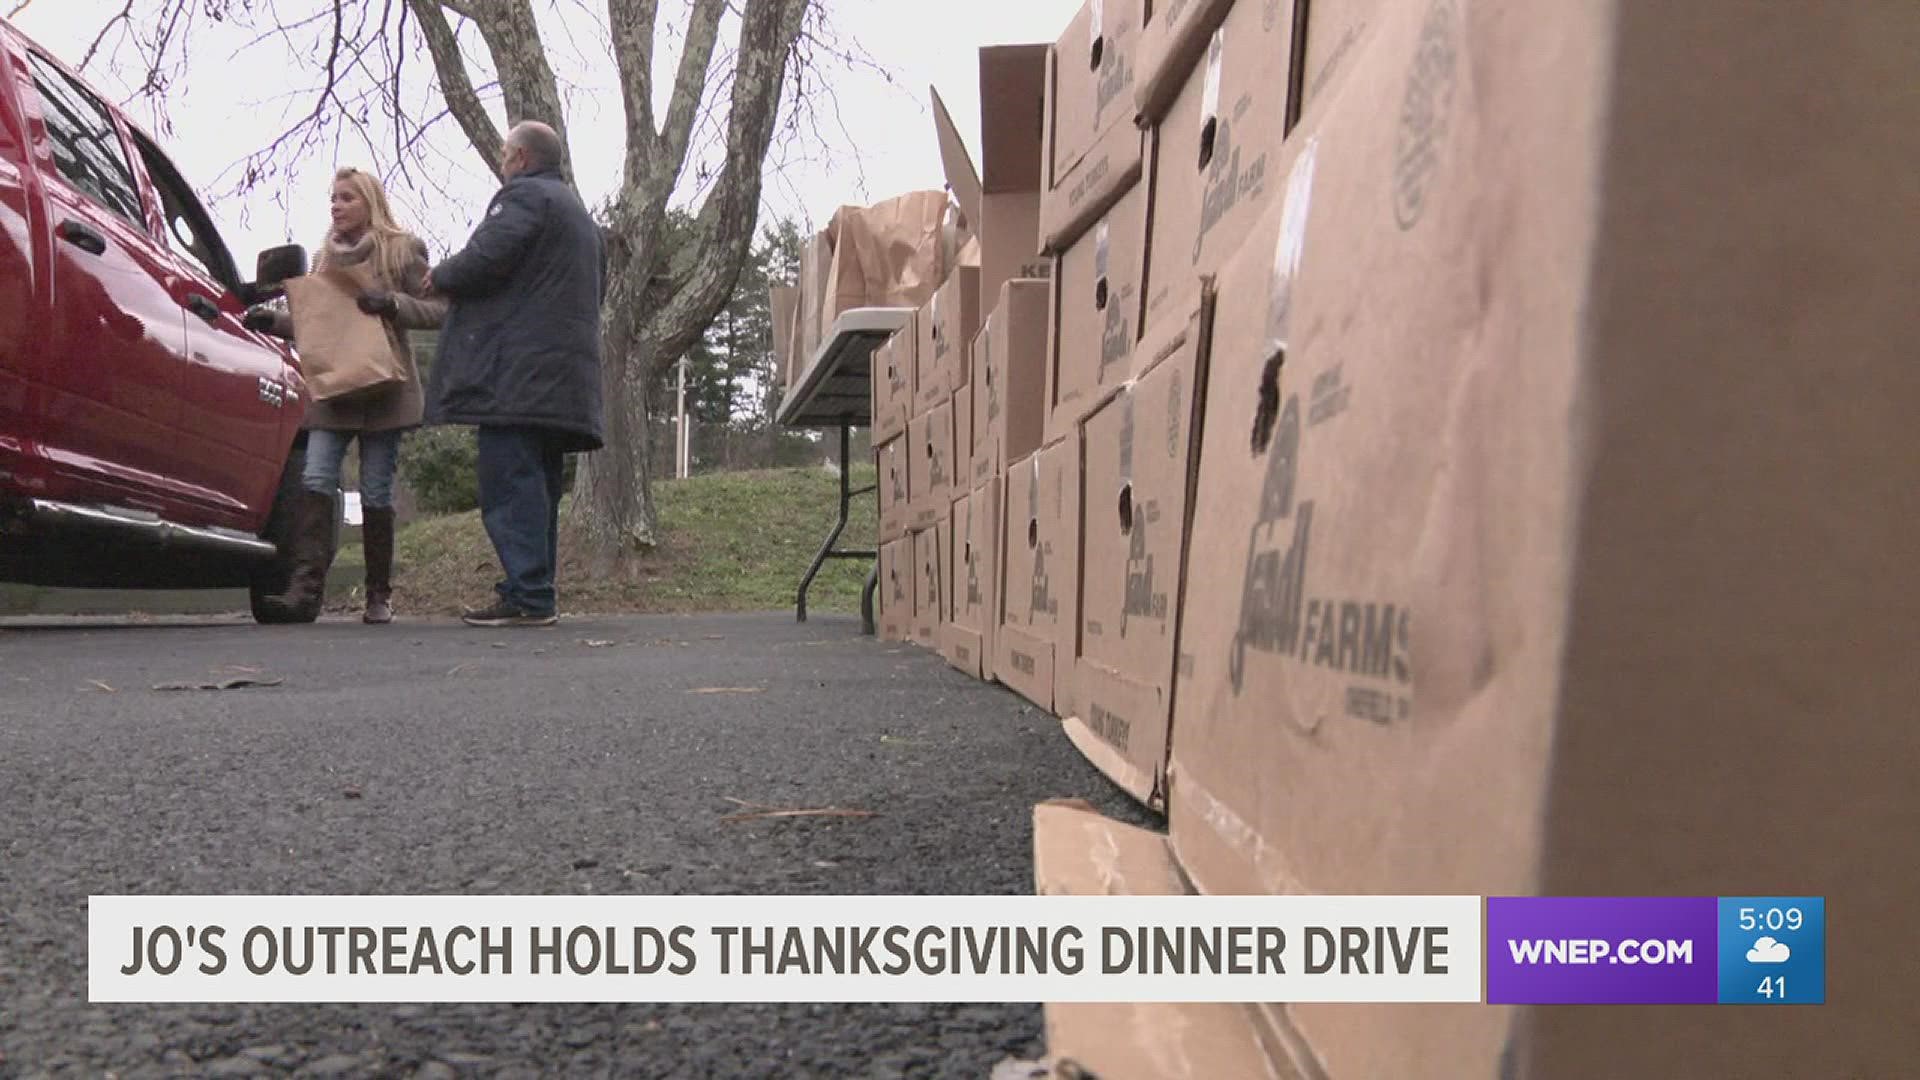 Almost two hundred frozen turkeys and other Thanksgiving fixings were handed out to families in need today in the Poconos.